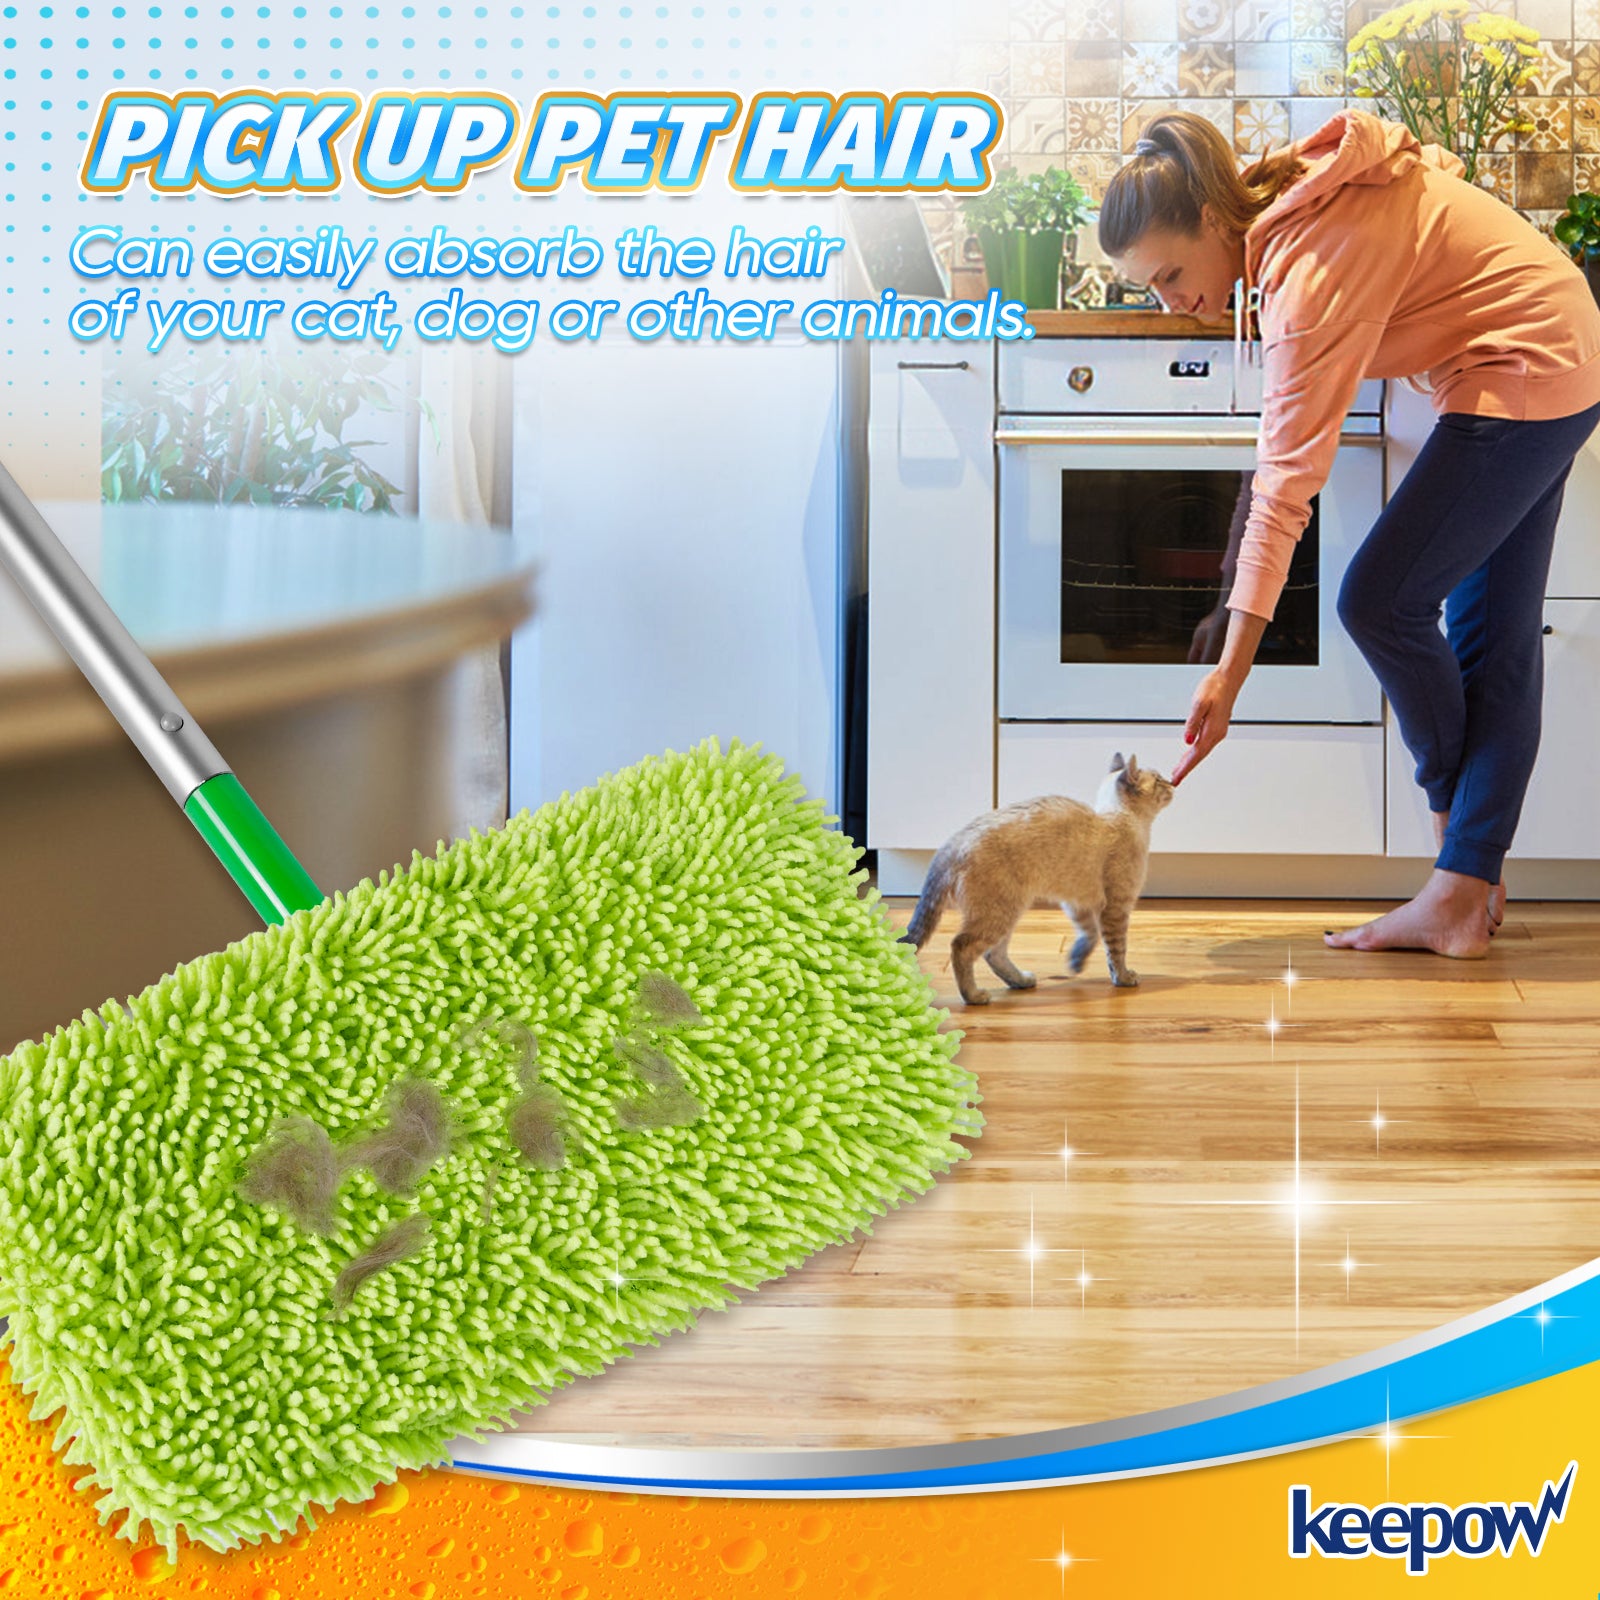 Keepow  Dry Sweeping Cloths, Washable Wet Mopping Cloth Refills for Surface/Hardwood Floor Cleaning